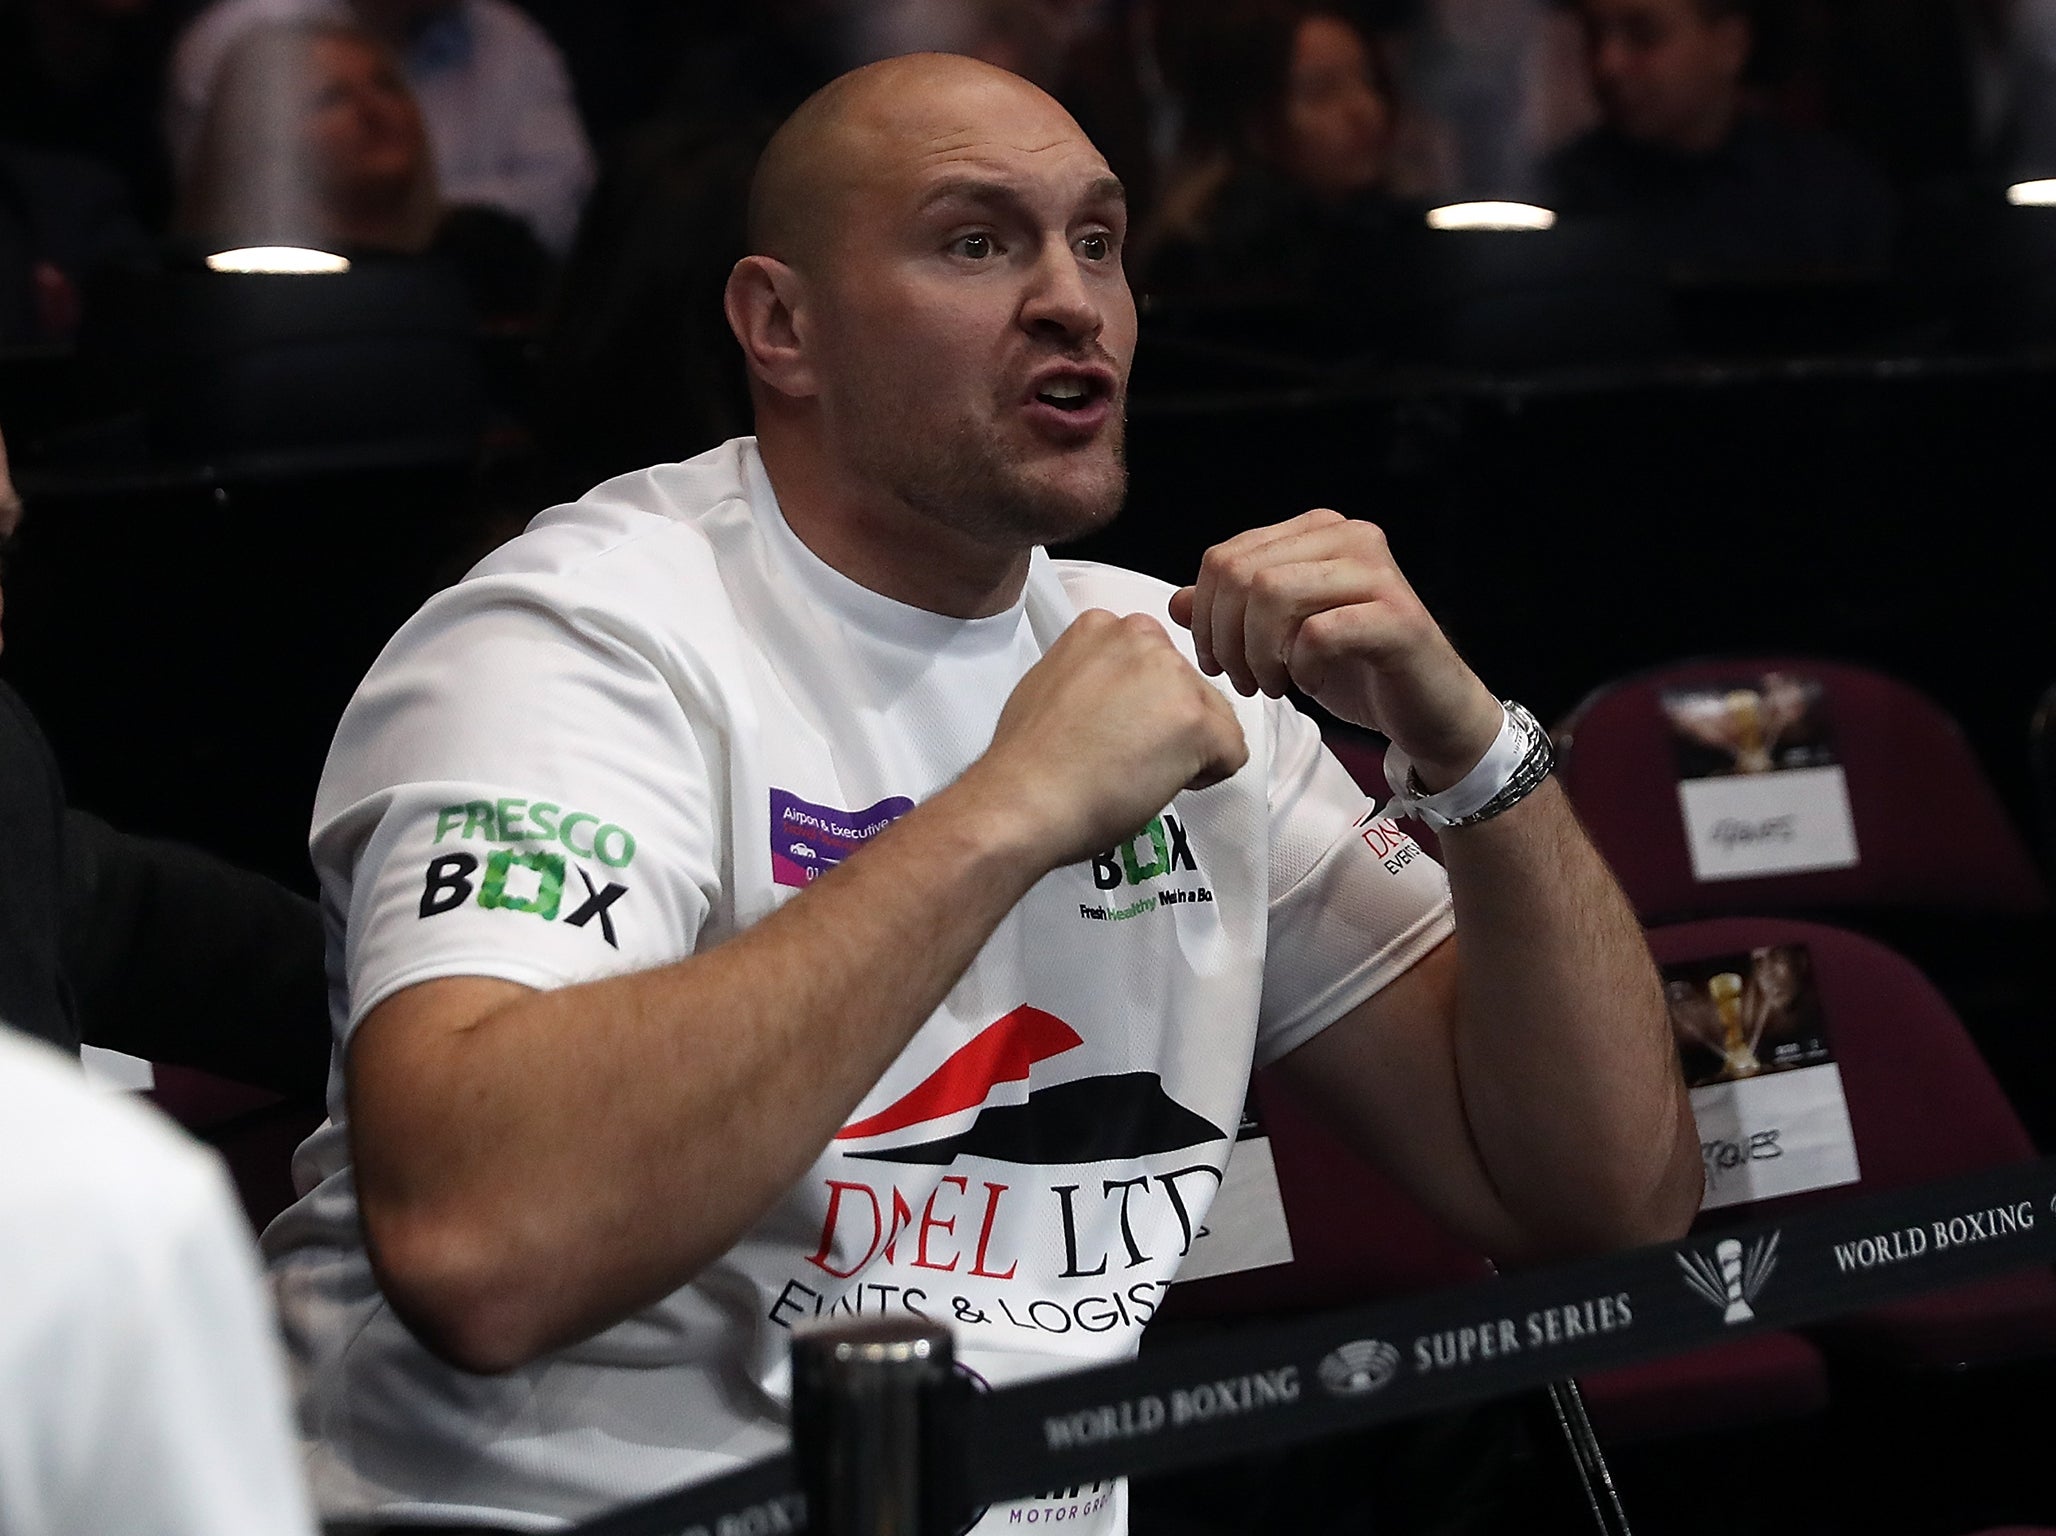 Tyson Fury is poised to make his long-awaited return to the ring